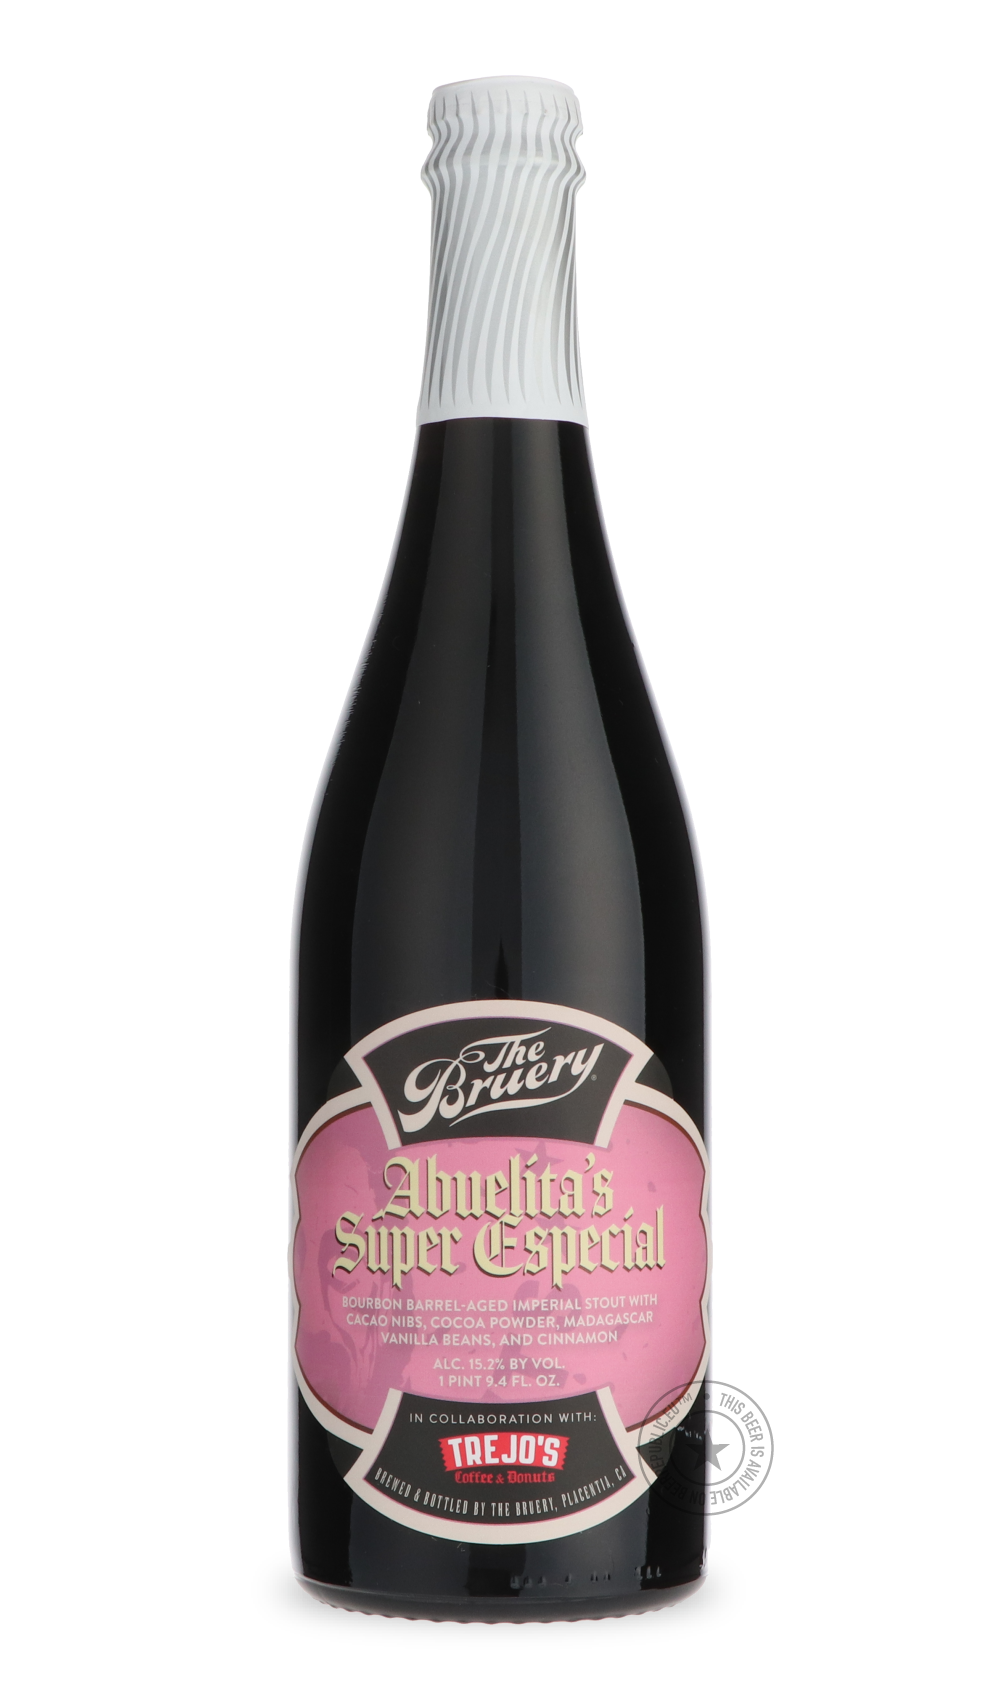 -The Bruery- Abuelita's Súper Especial-Stout & Porter- Only @ Beer Republic - The best online beer store for American & Canadian craft beer - Buy beer online from the USA and Canada - Bier online kopen - Amerikaans bier kopen - Craft beer store - Craft beer kopen - Amerikanisch bier kaufen - Bier online kaufen - Acheter biere online - IPA - Stout - Porter - New England IPA - Hazy IPA - Imperial Stout - Barrel Aged - Barrel Aged Imperial Stout - Brown - Dark beer - Blond - Blonde - Pilsner - Lager - Wheat - 